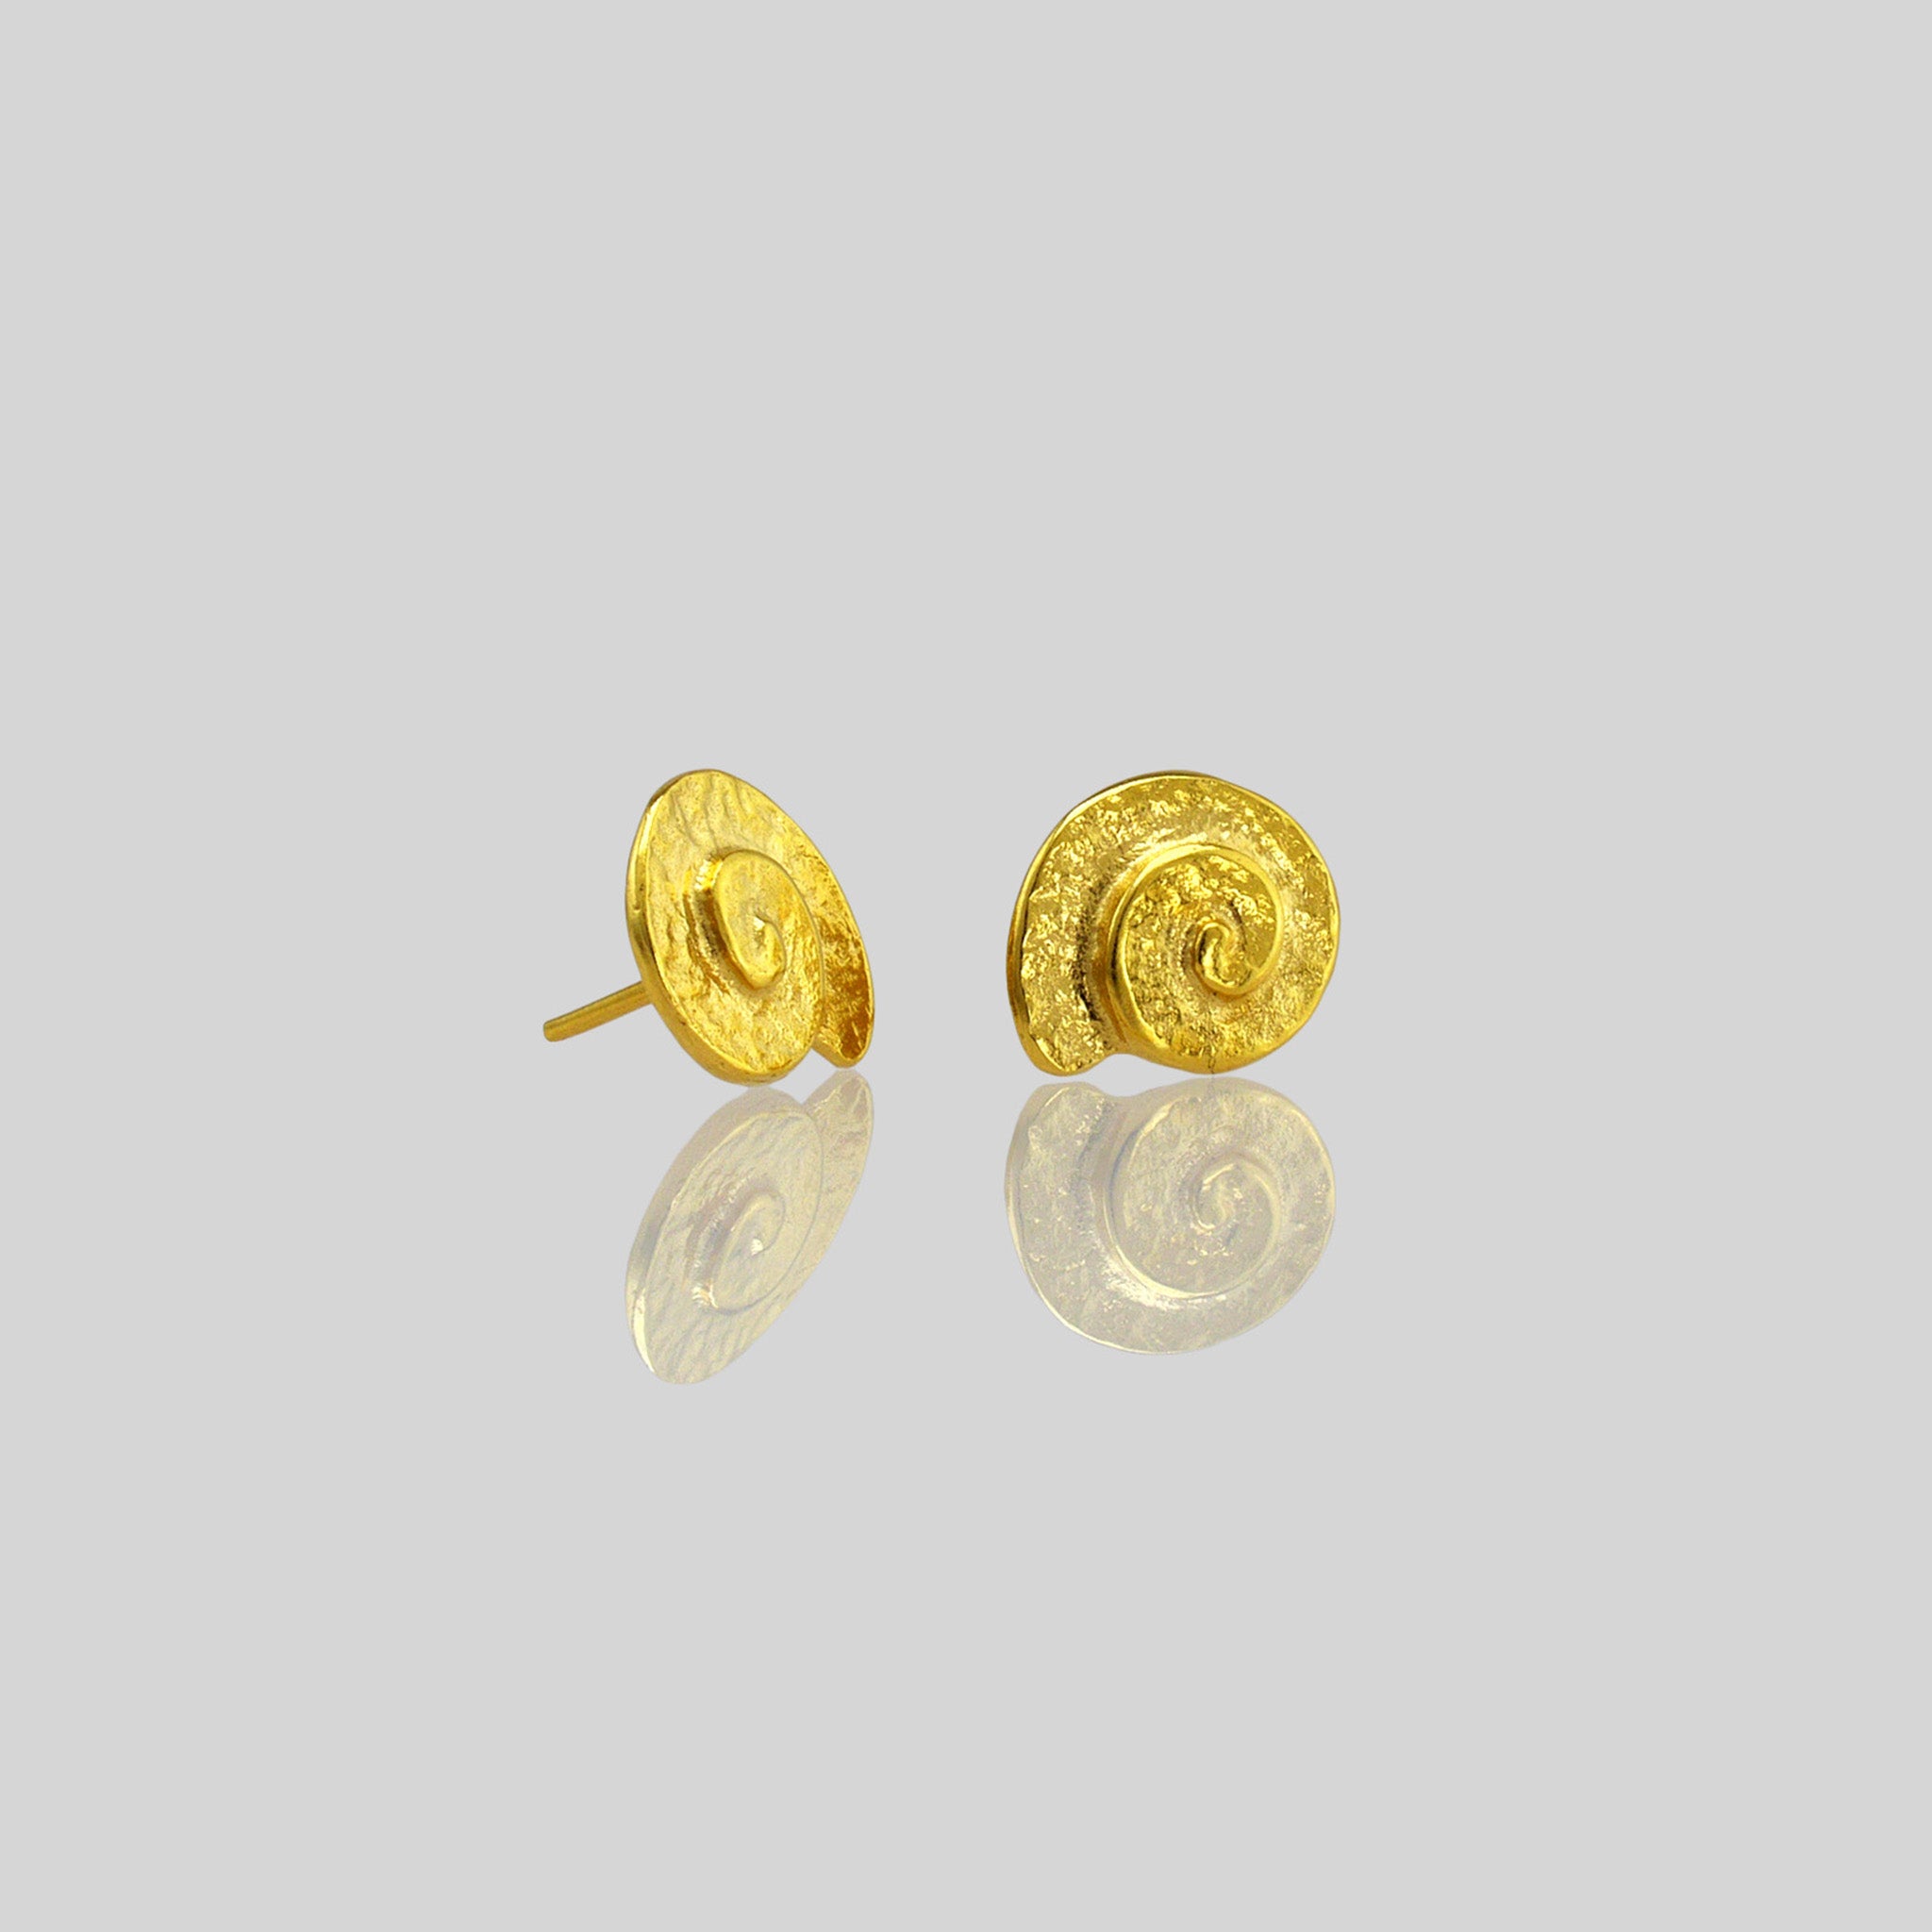 Close up of Classic and elegant yellow gold stud earrings with a textured arched spiral.